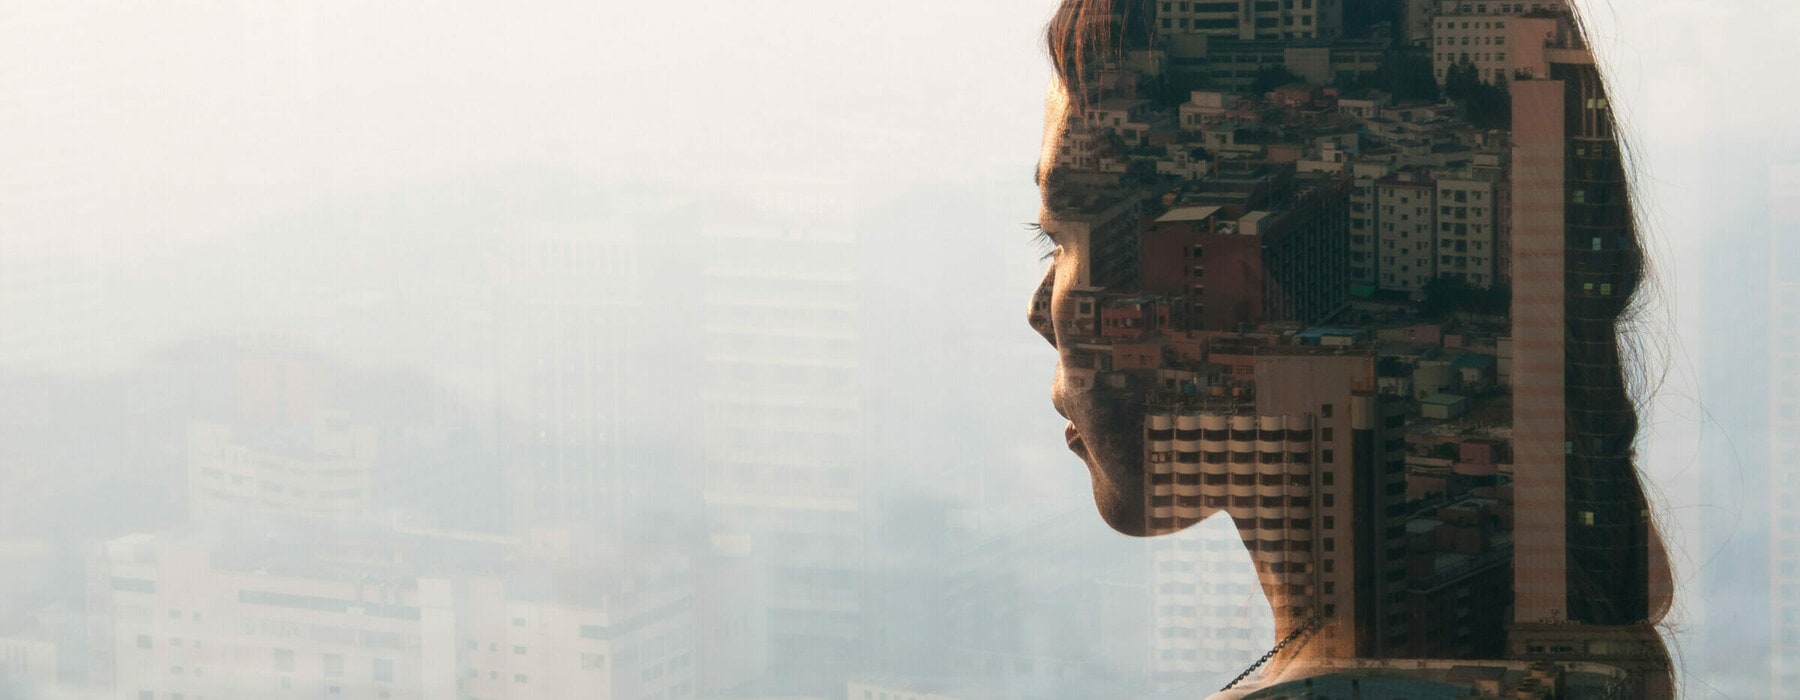 double exposure of woman looking at cityscape,shenzhen,china